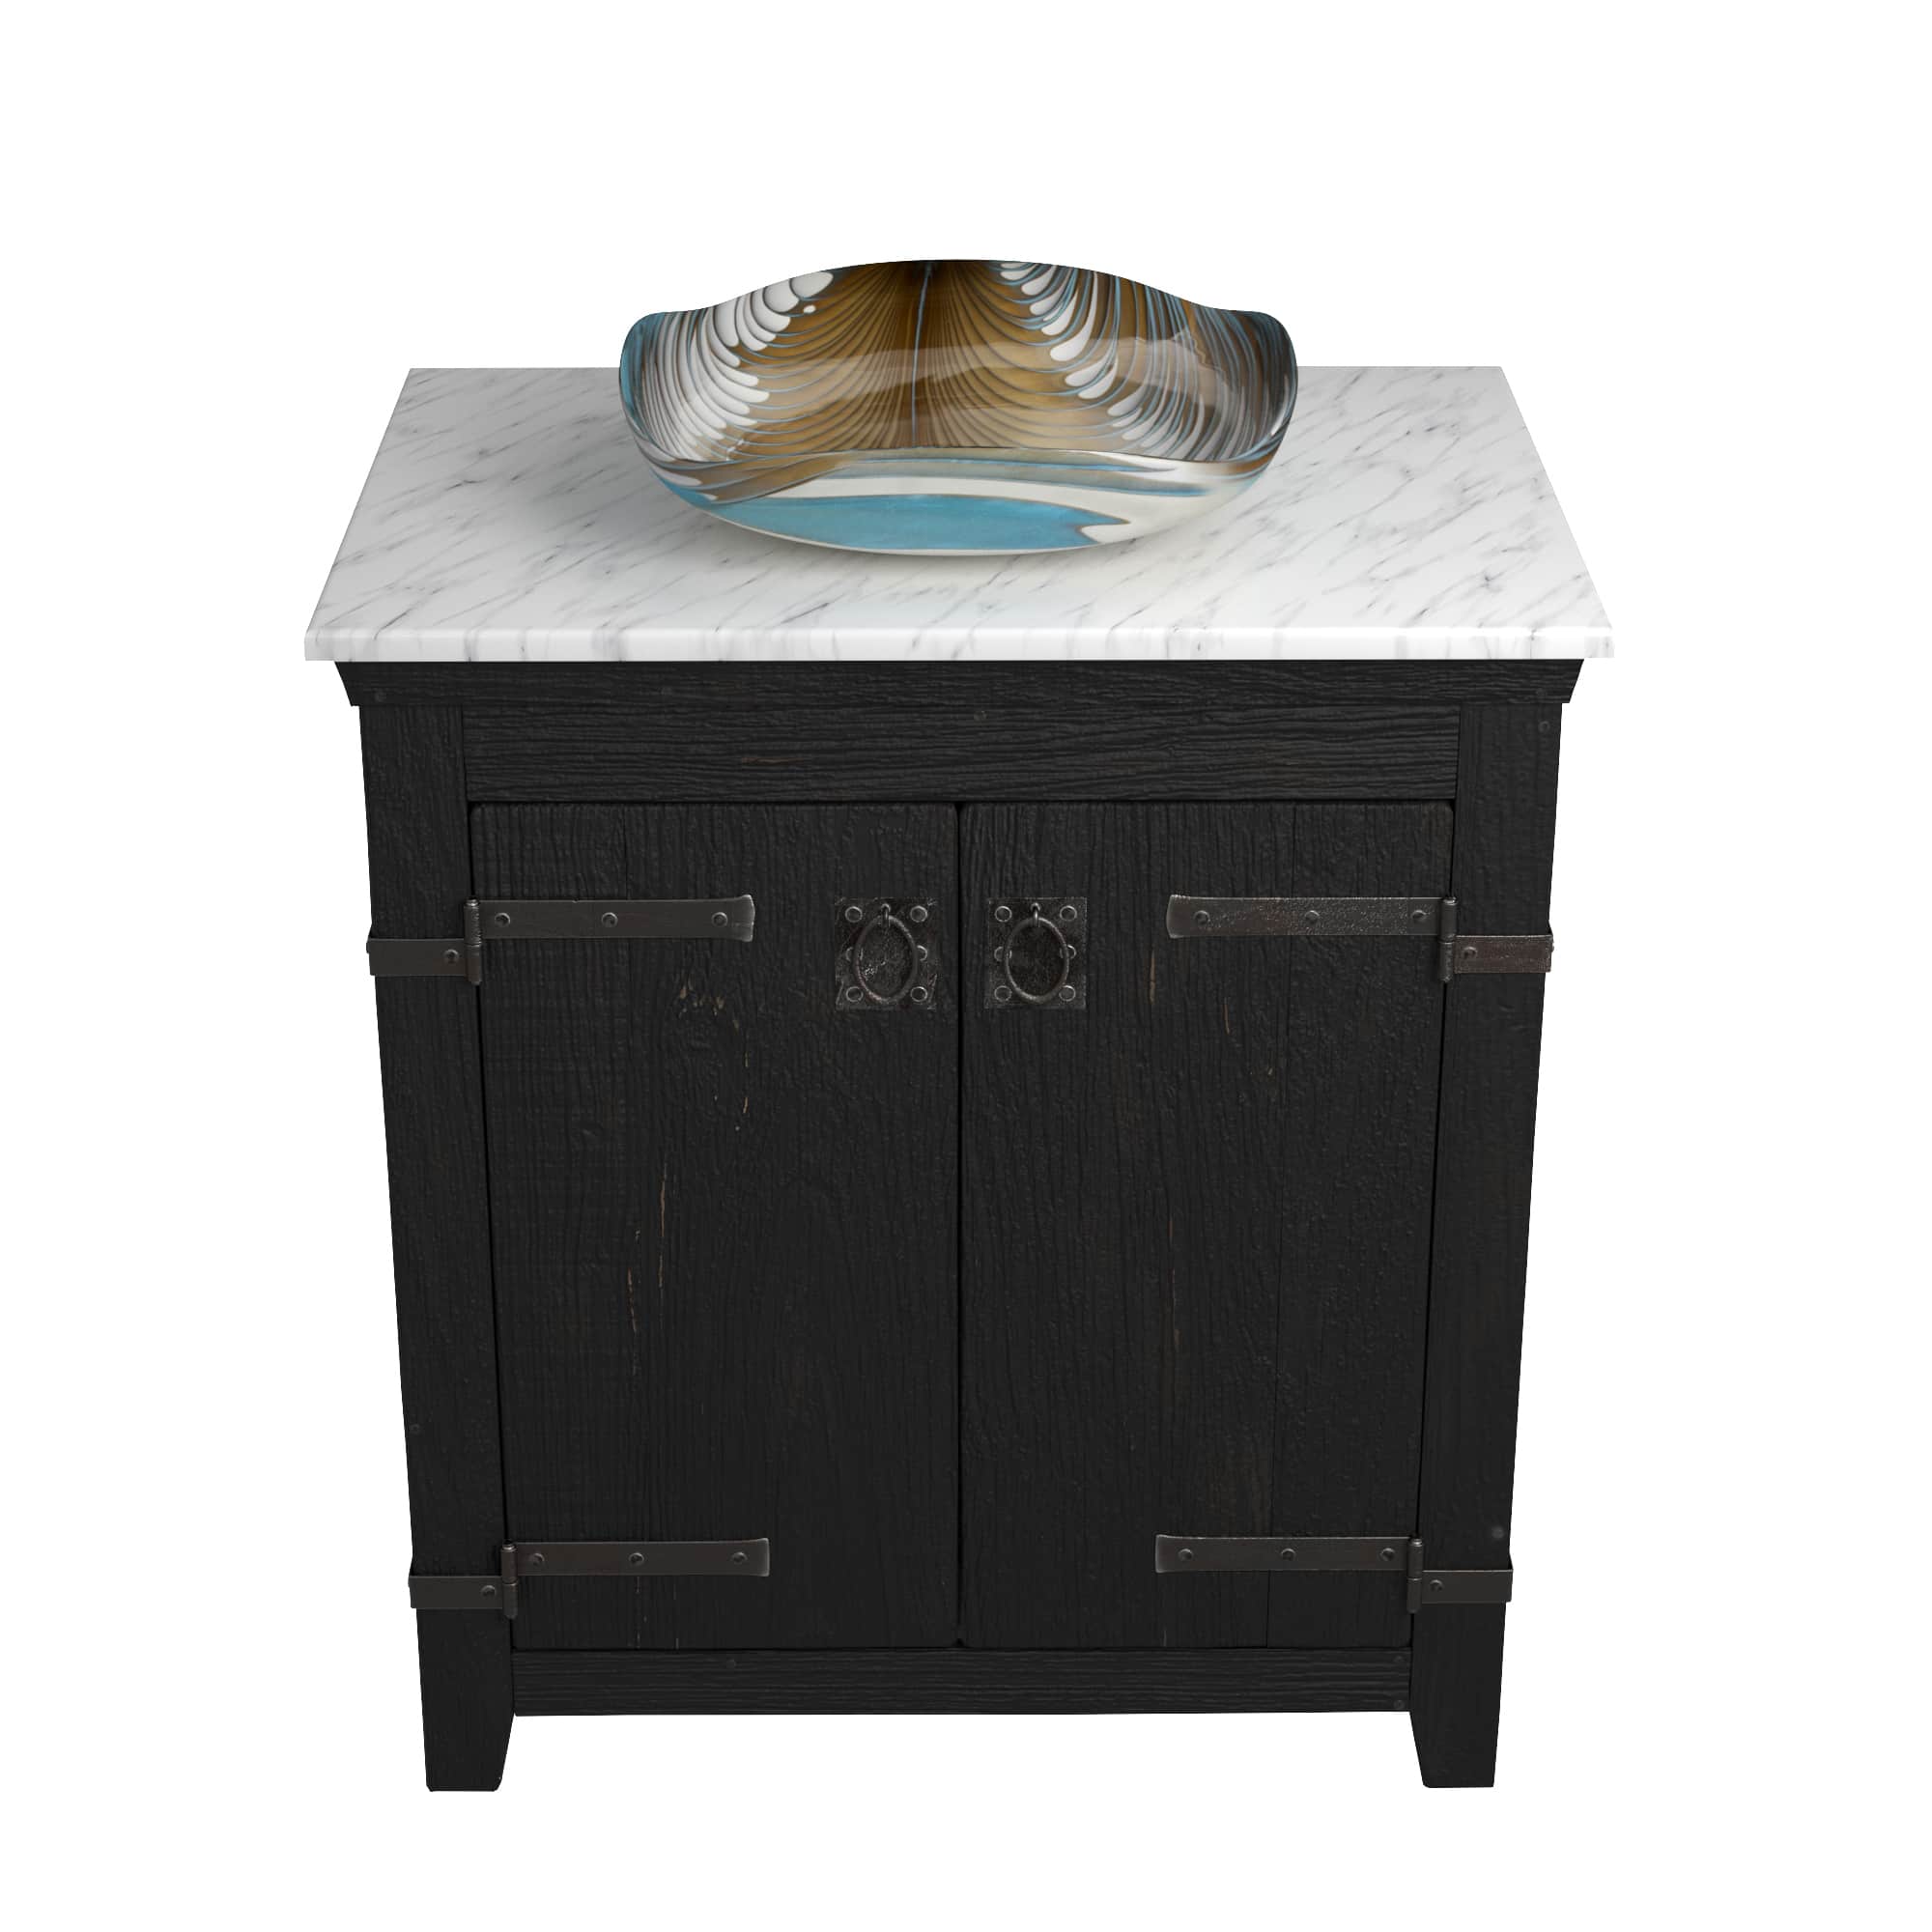 Native Trails 30" Americana Vanity in Anvil with Carrara Marble Top and Lido in Shoreline, No Faucet Hole, BND30-VB-CT-MG-030